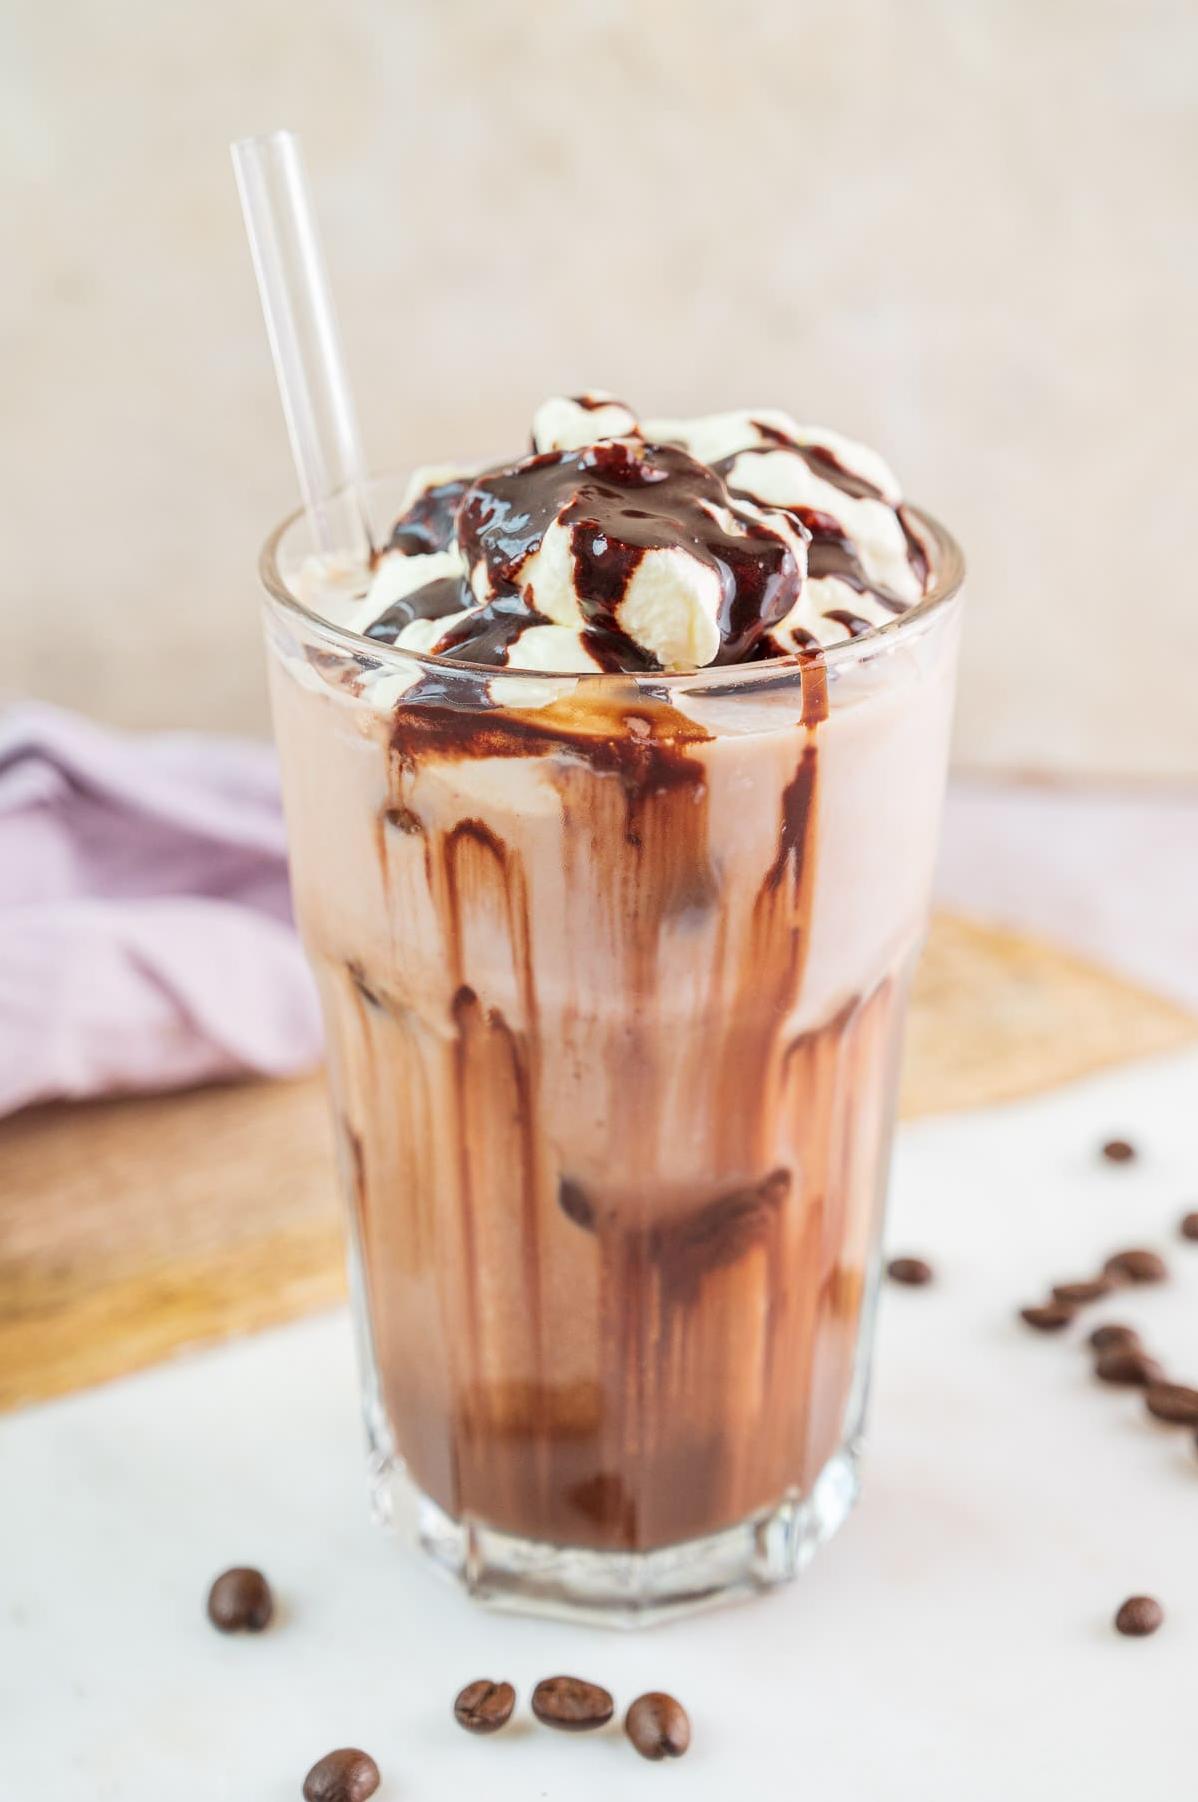  Looking for a pick-me-up? Try this iced mocha cafe